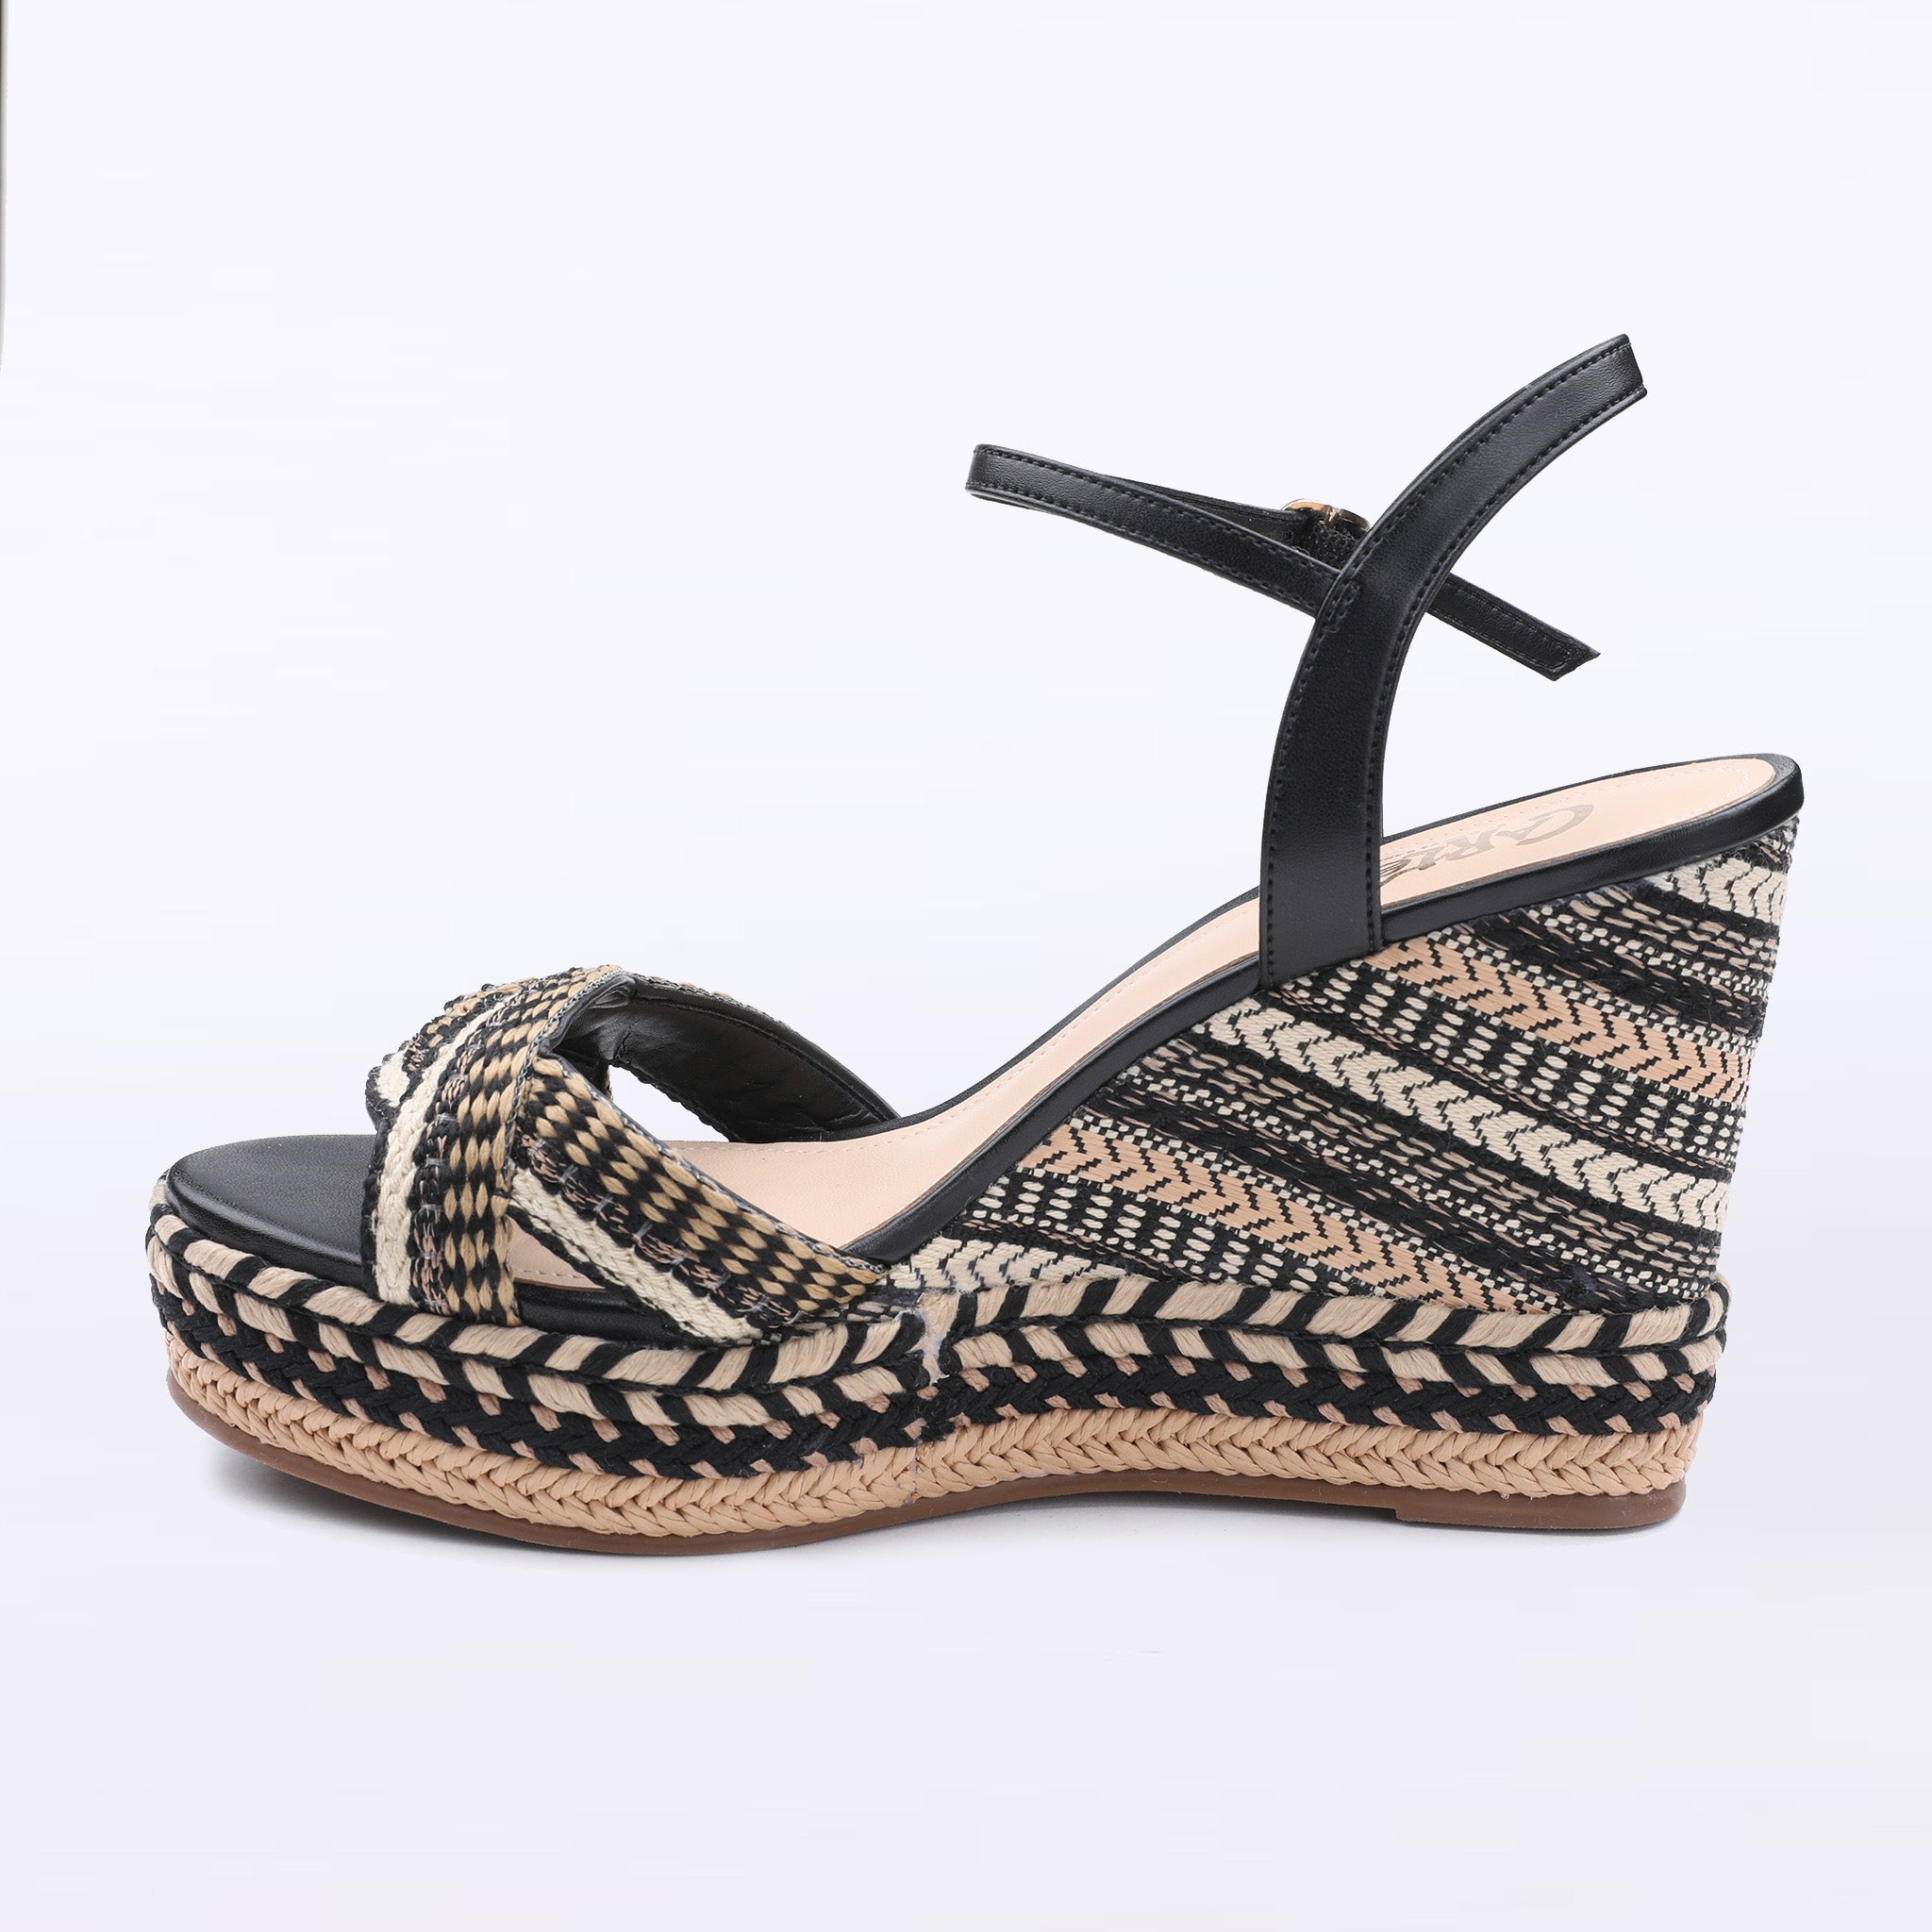 Aggregate more than 230 womens wedge sandals latest